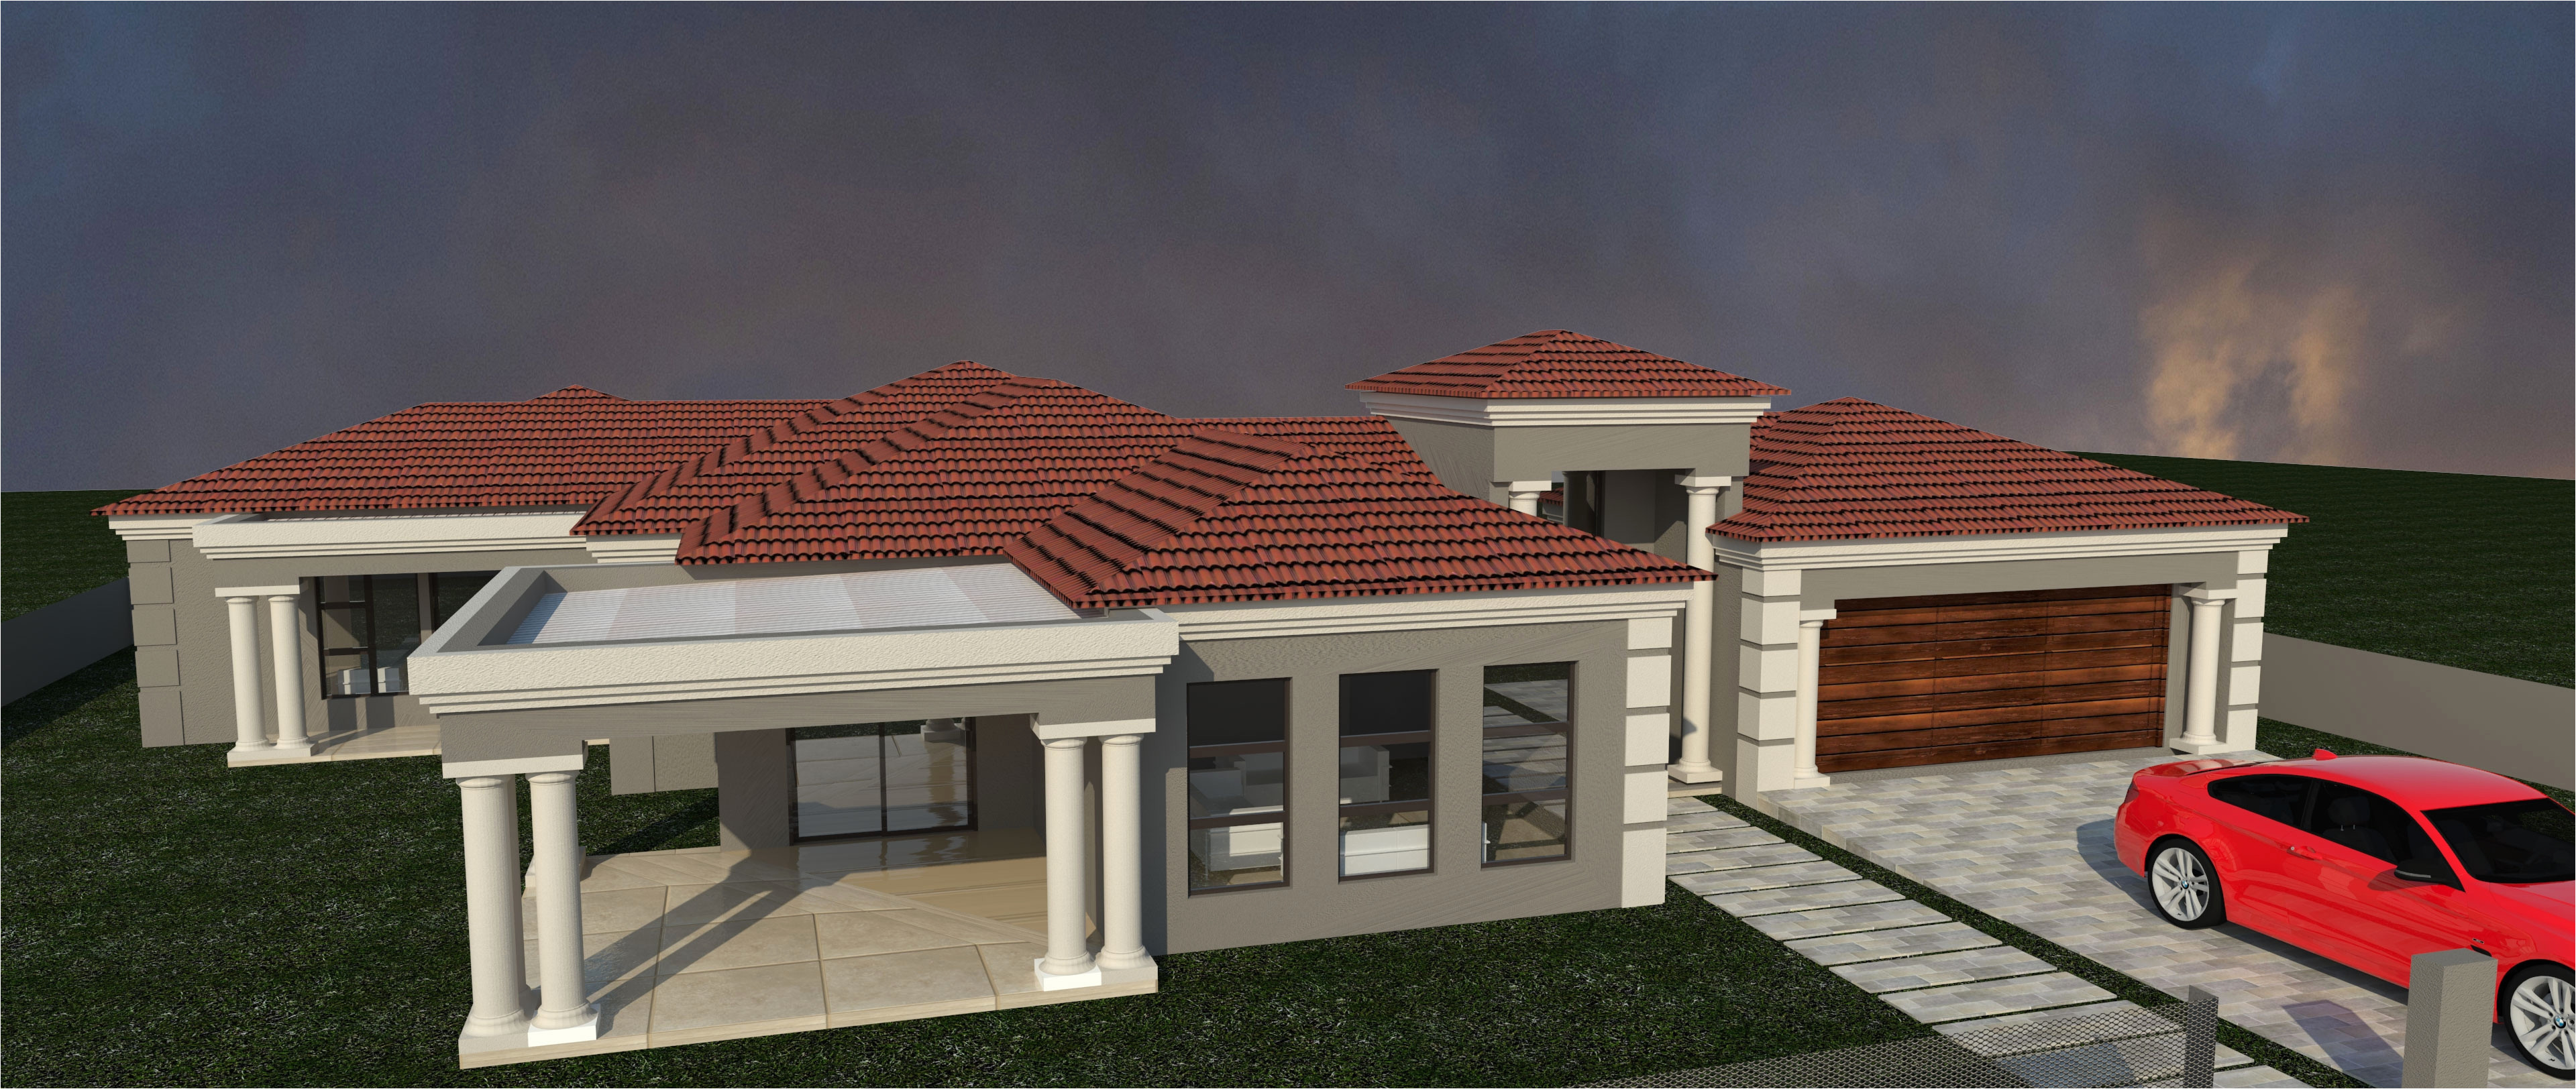 my home plans best of 50 beautiful 3 bedroom house plans in limpopo home